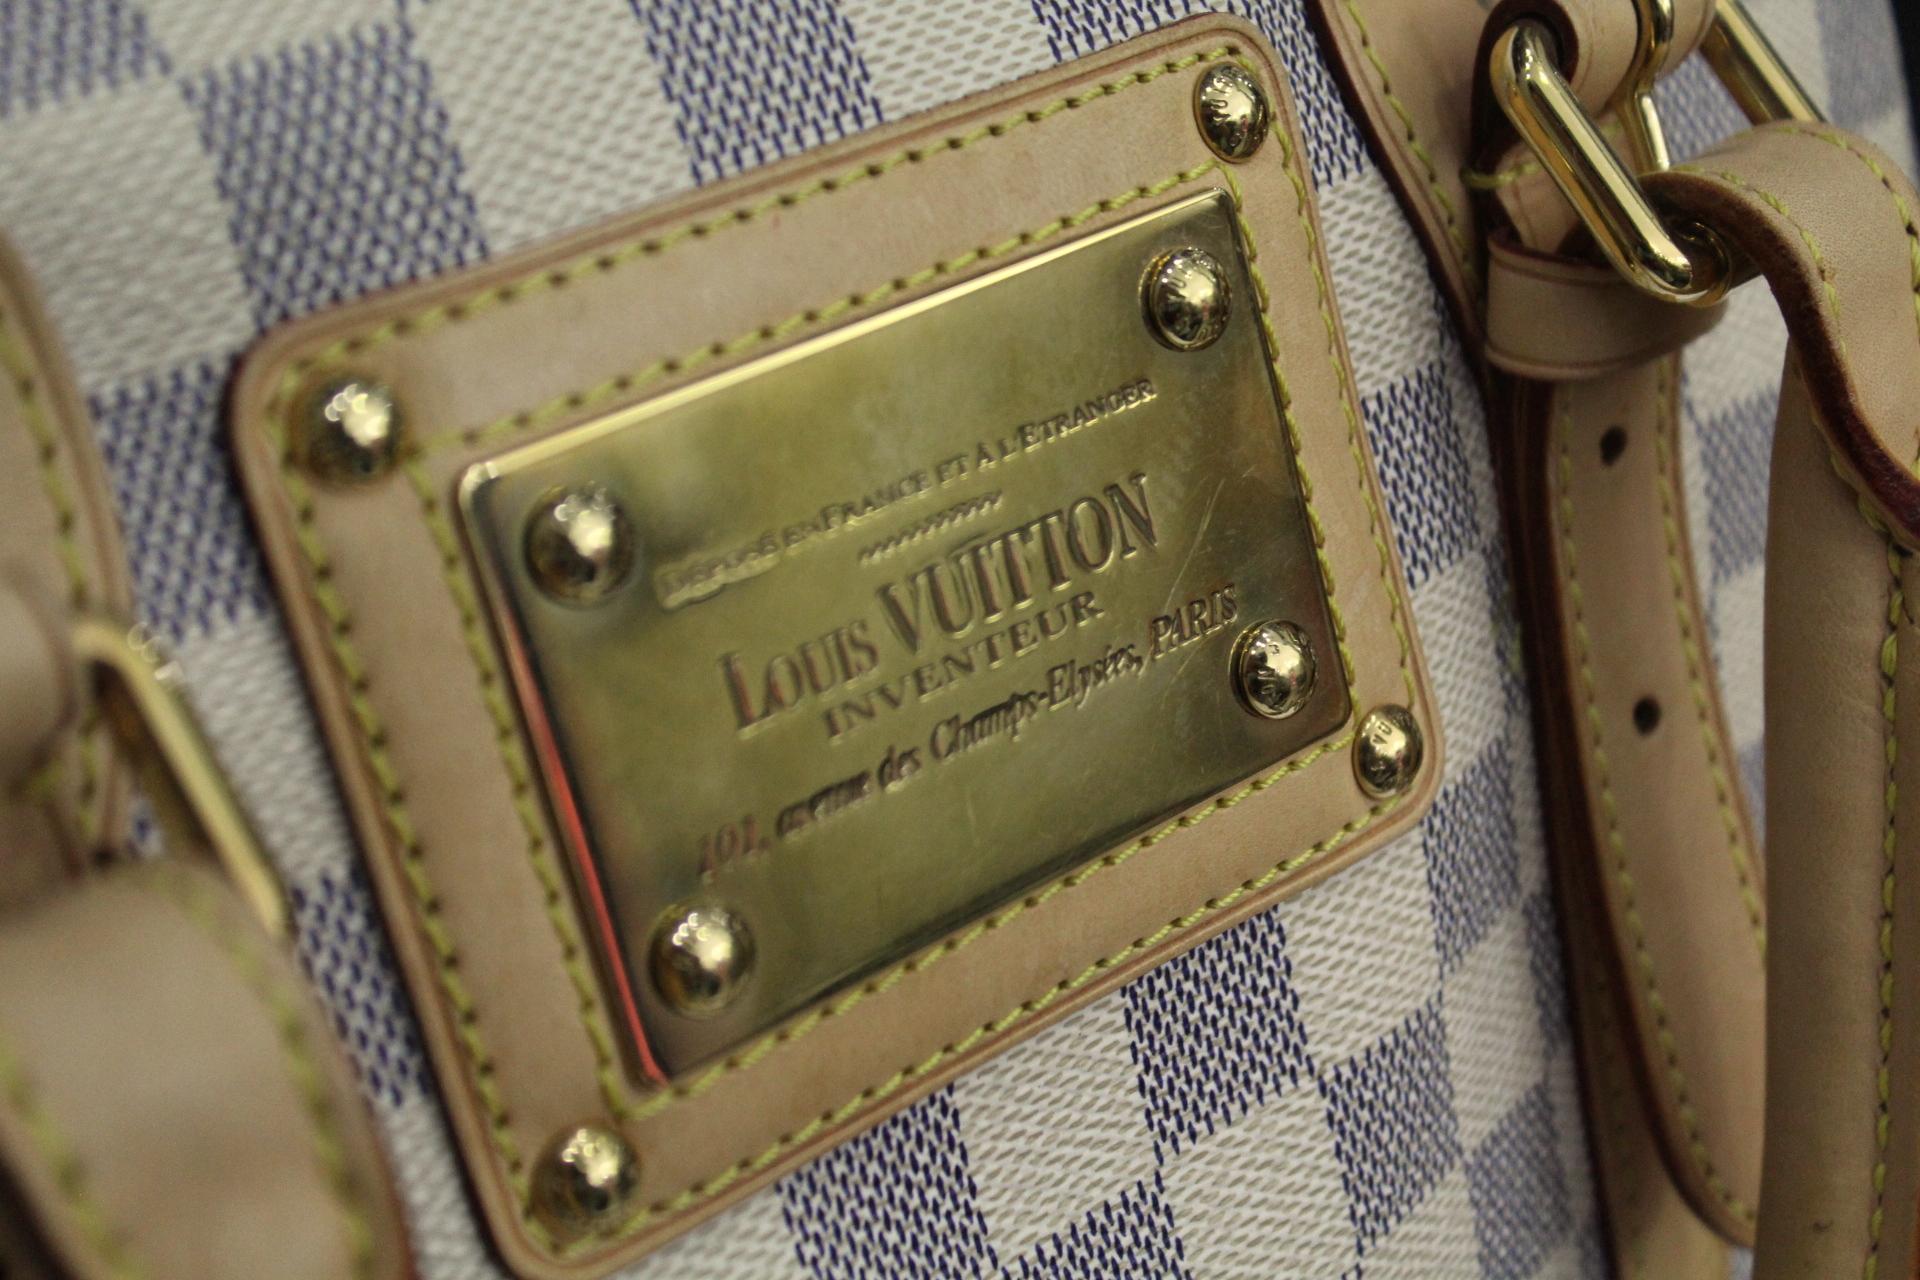  This wonderful day bag is crafted of signature azur damier Louis Vuitton patterned canvas with complimentary vachetta cowhide leather including corner plates and rolled leather adjustable top handles. There is polished brass including buckles and a